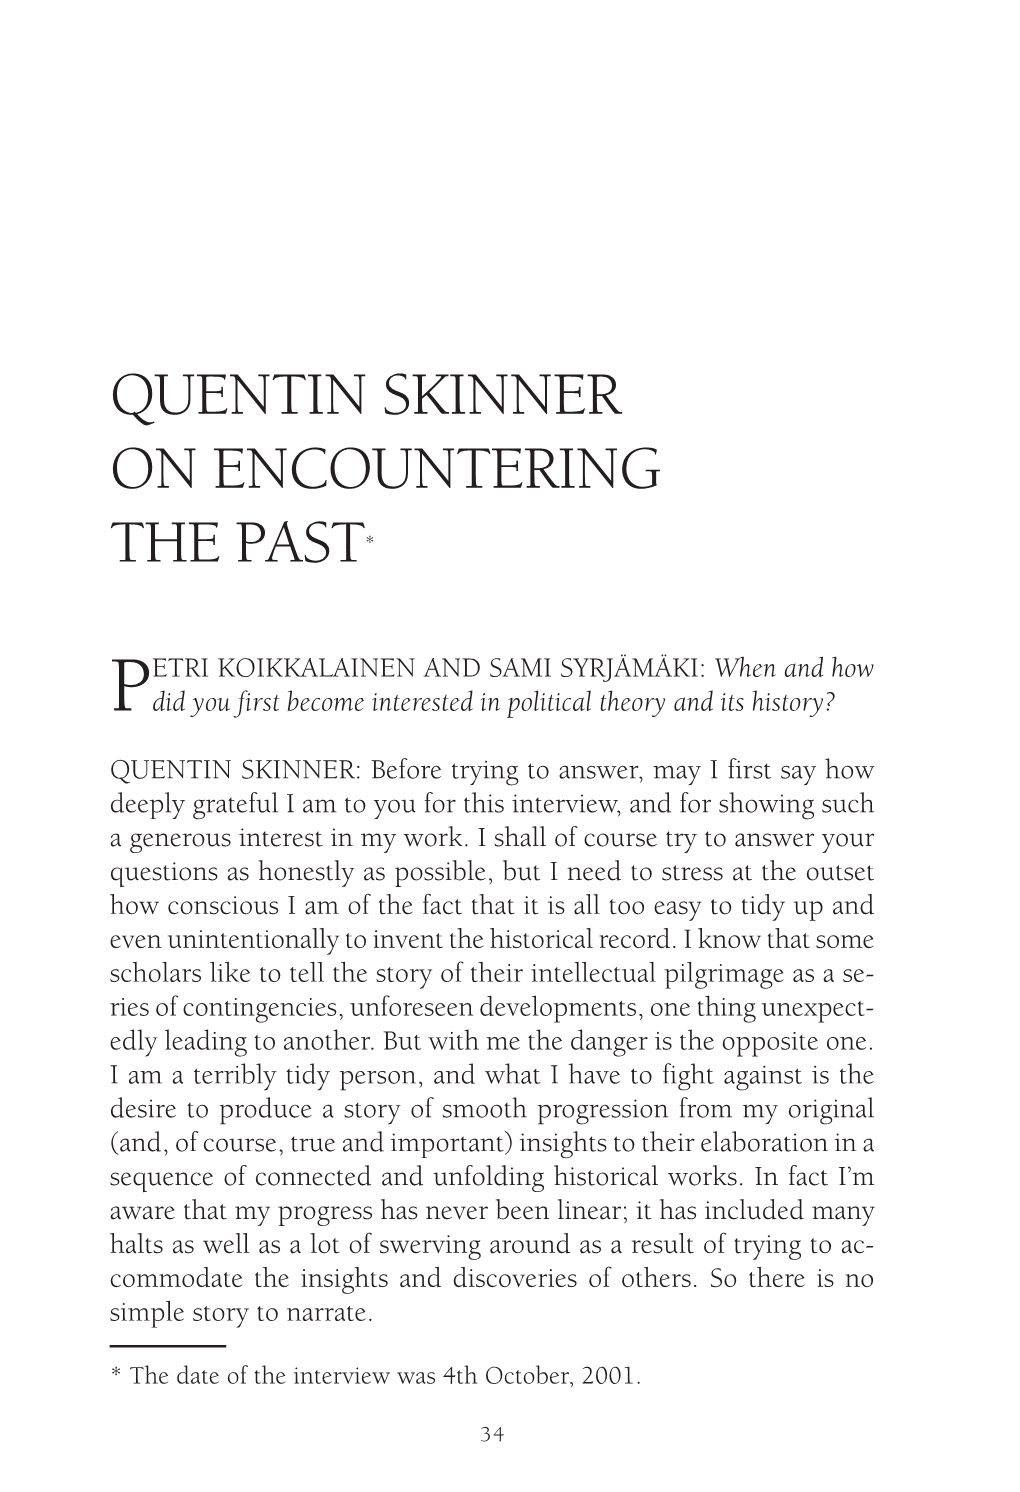 Quentin Skinner on Encountering the Past*